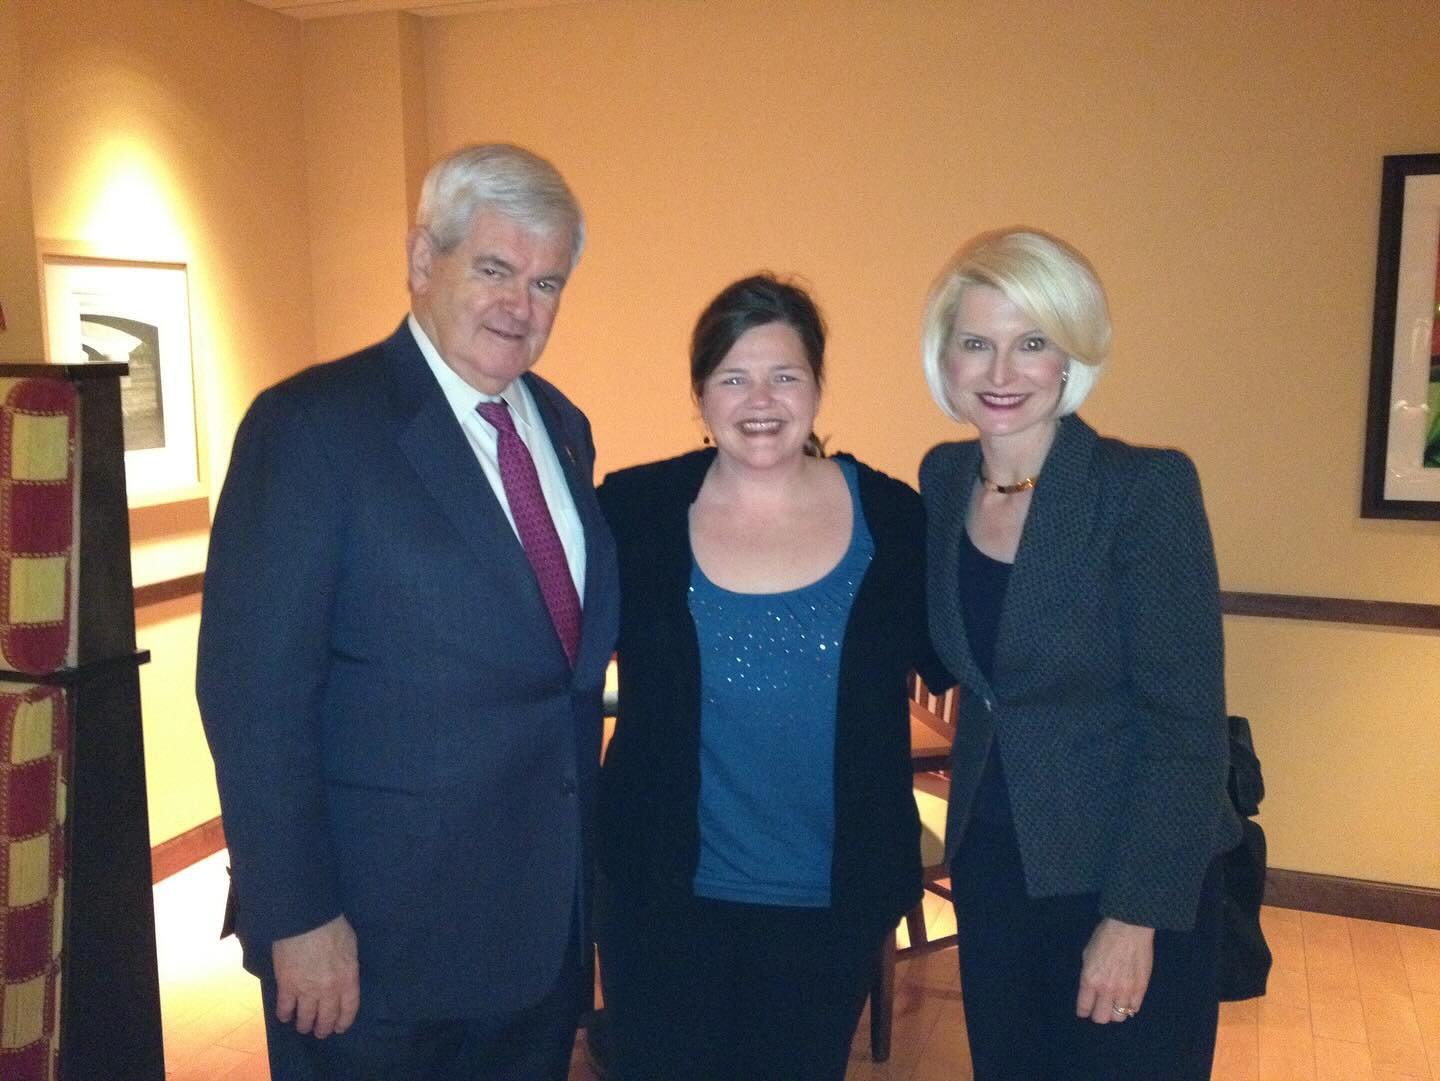 Today is #VolunteerRecognitionDay! Here are some of my favorite volunteer-based memories from the last several years...

Photo 1. Volunteering for @NewtGingrich&rsquo;s presidential campaign in 2012.

Photo 2. That time @Franklin_Graham asked me to s